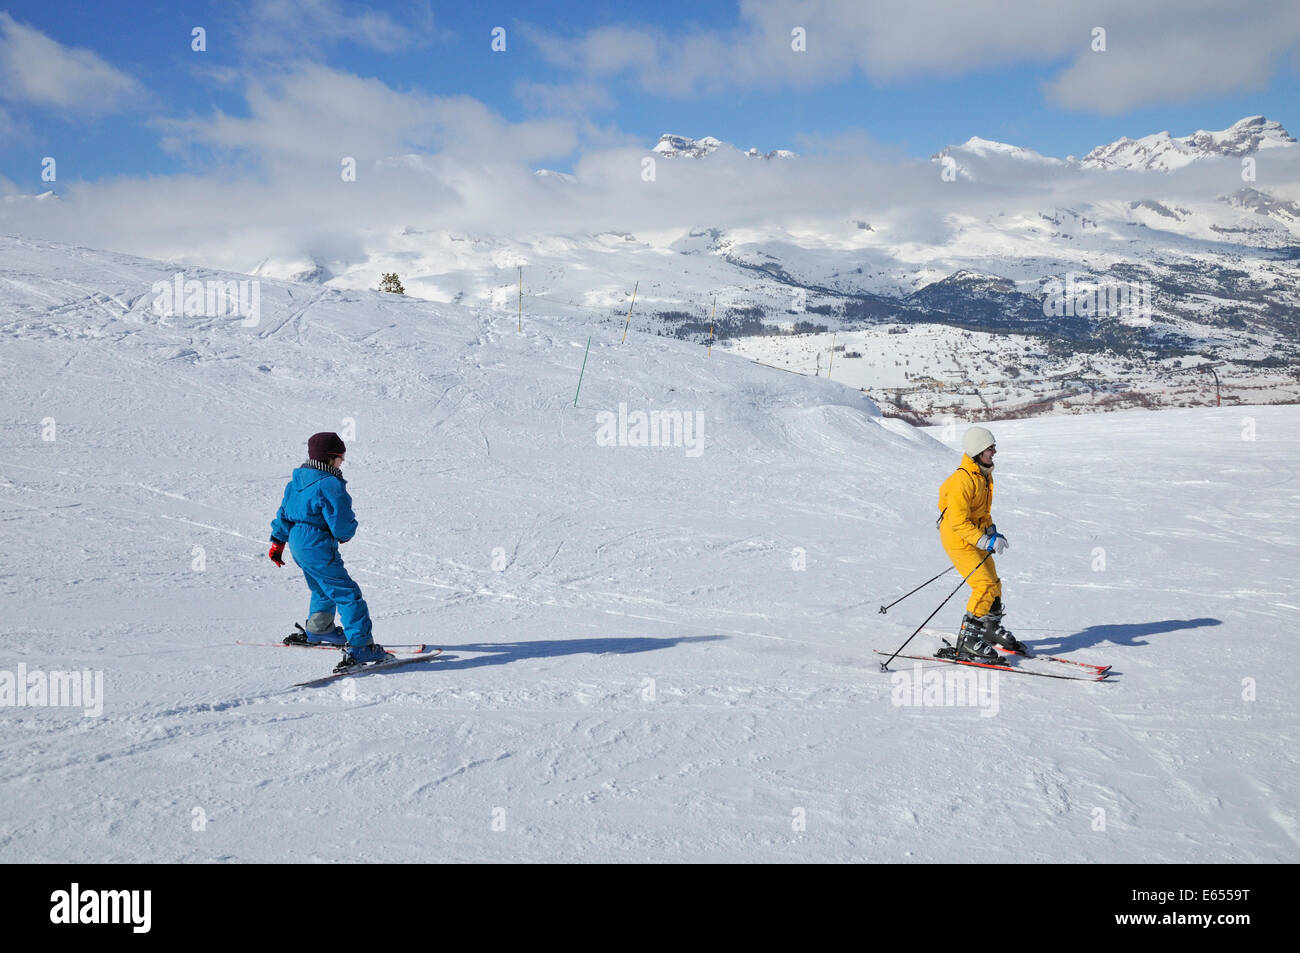 Mother and pre-teen daughter skiing together, Devoluy, French Alps, France, Europe Stock Photo